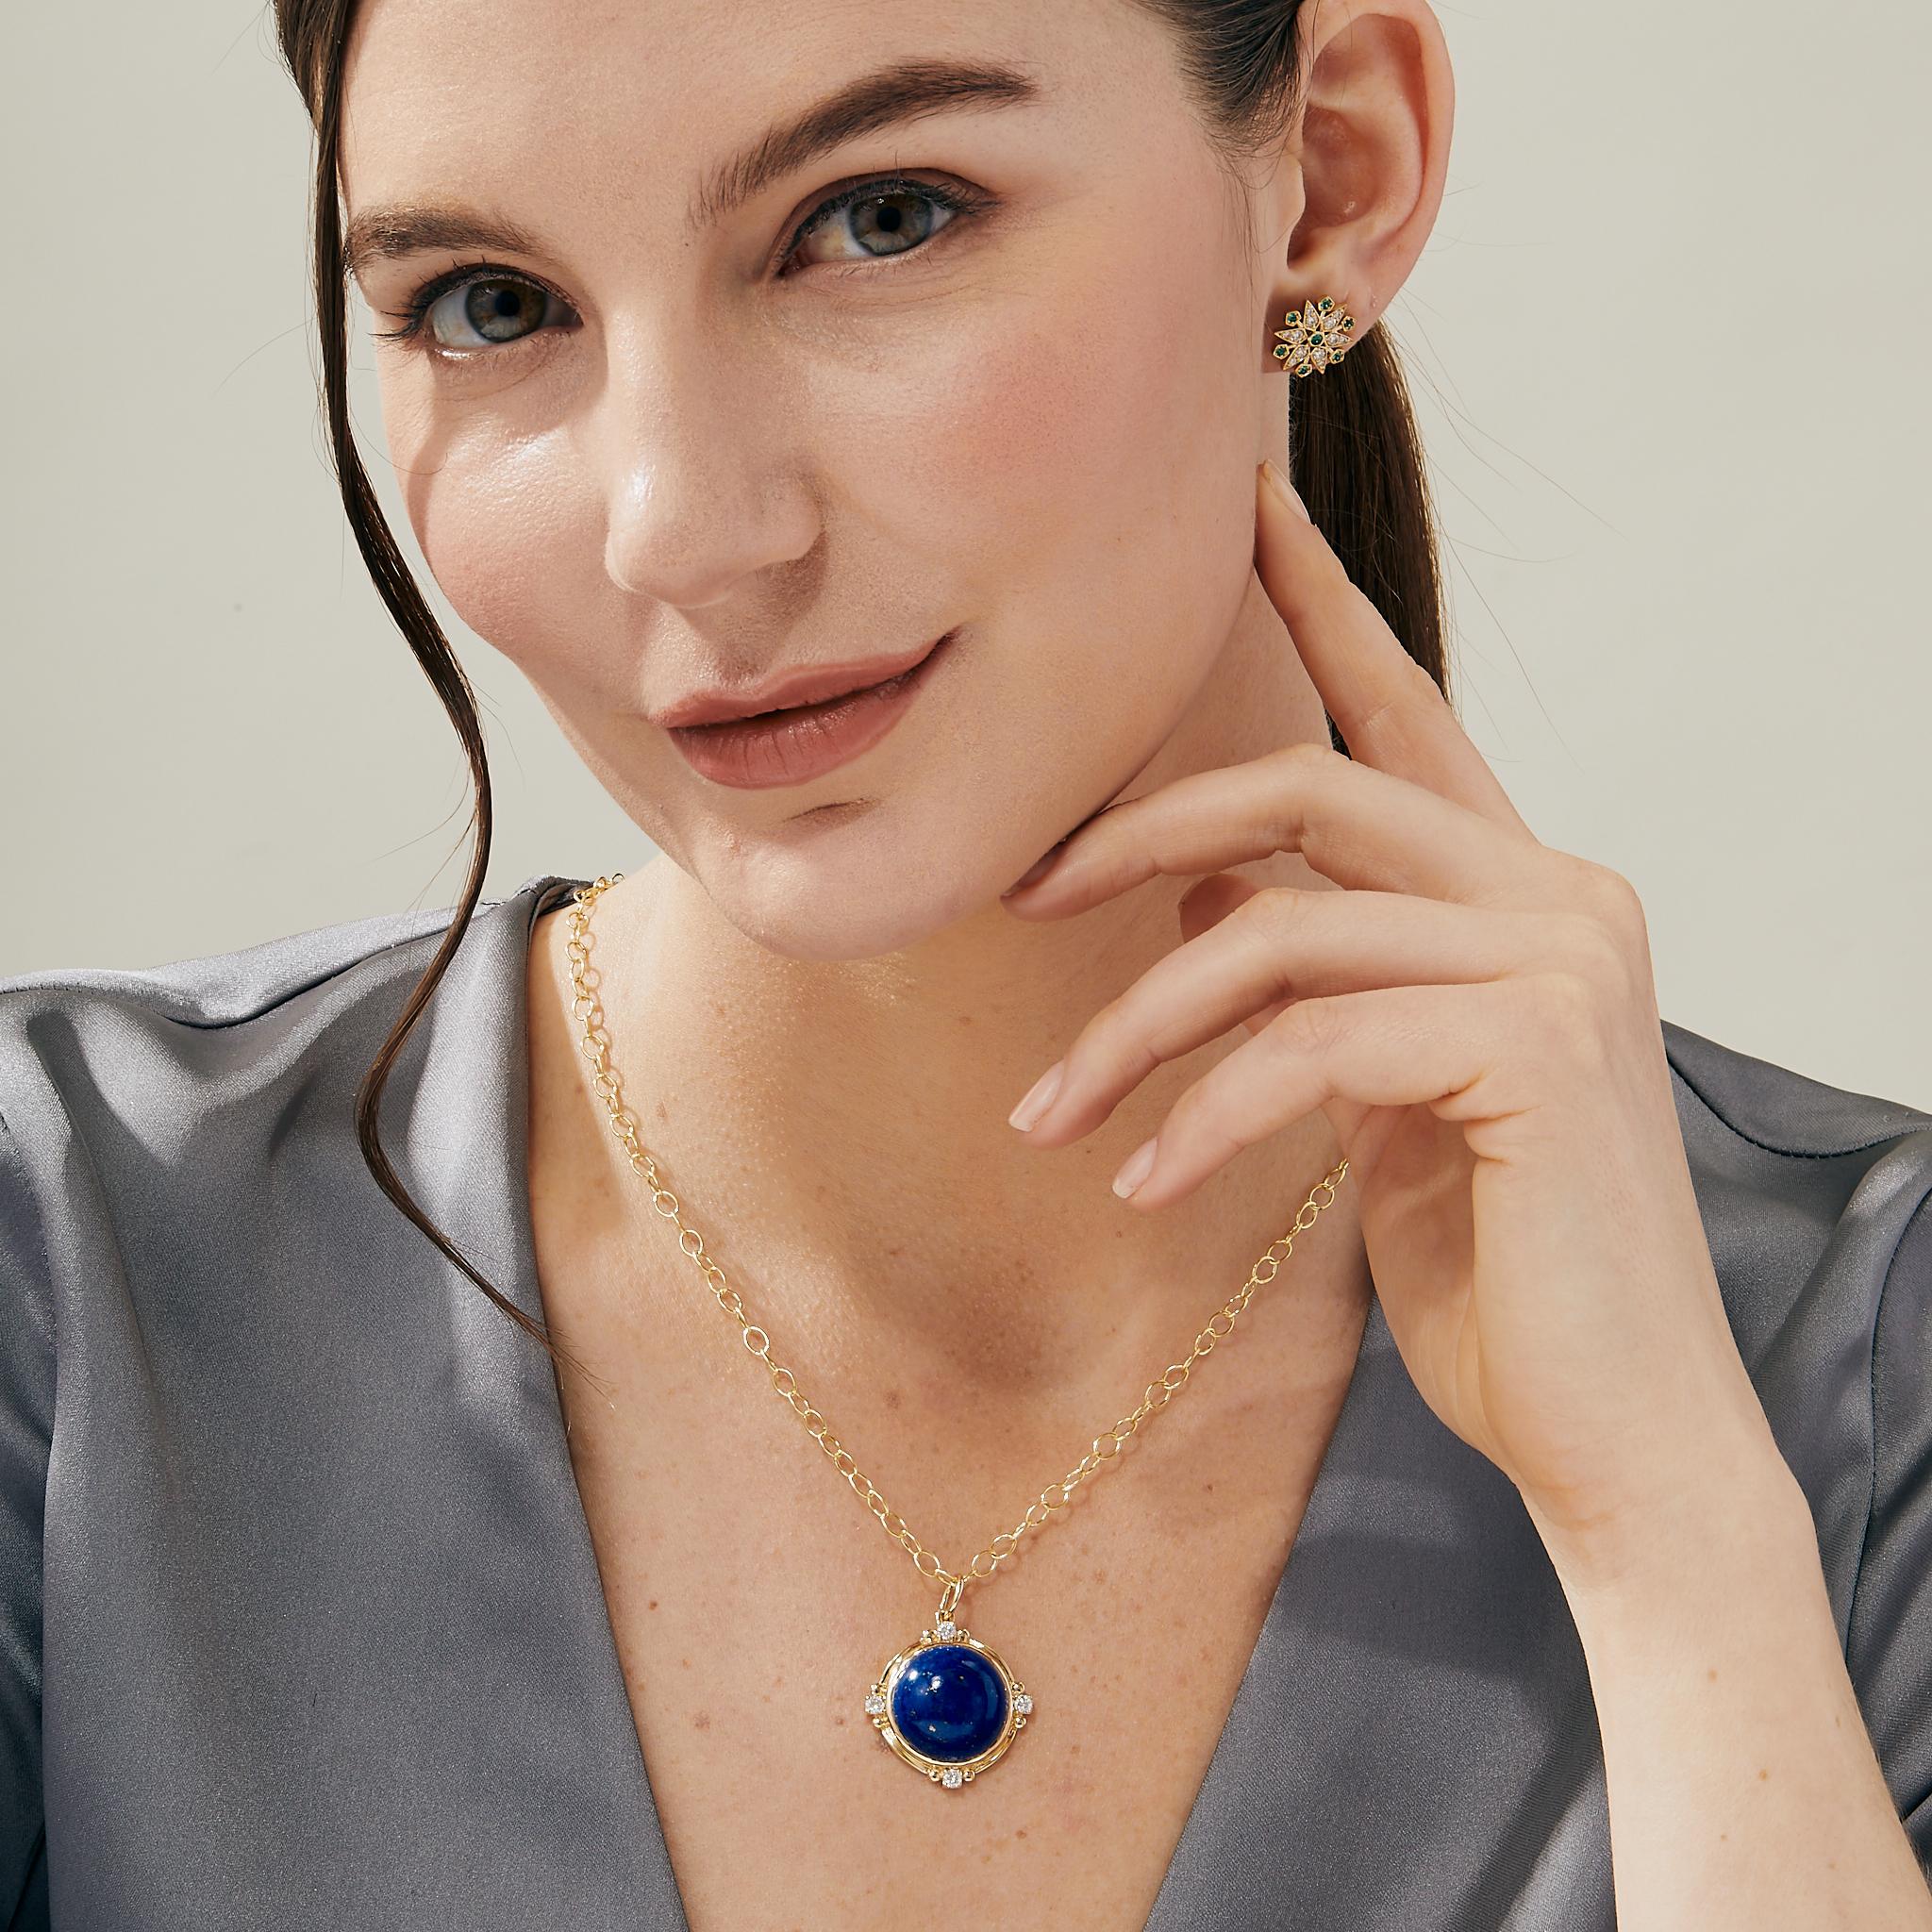 Created in 18 karat yellow gold
Lapis lazuli 25 carats approx.
Diamonds 0.35 carat approx.
Chain sold separately 
Limited edition


About the Designers ~ Dharmesh & Namrata

Drawing inspiration from little things, Dharmesh & Namrata Kothari have